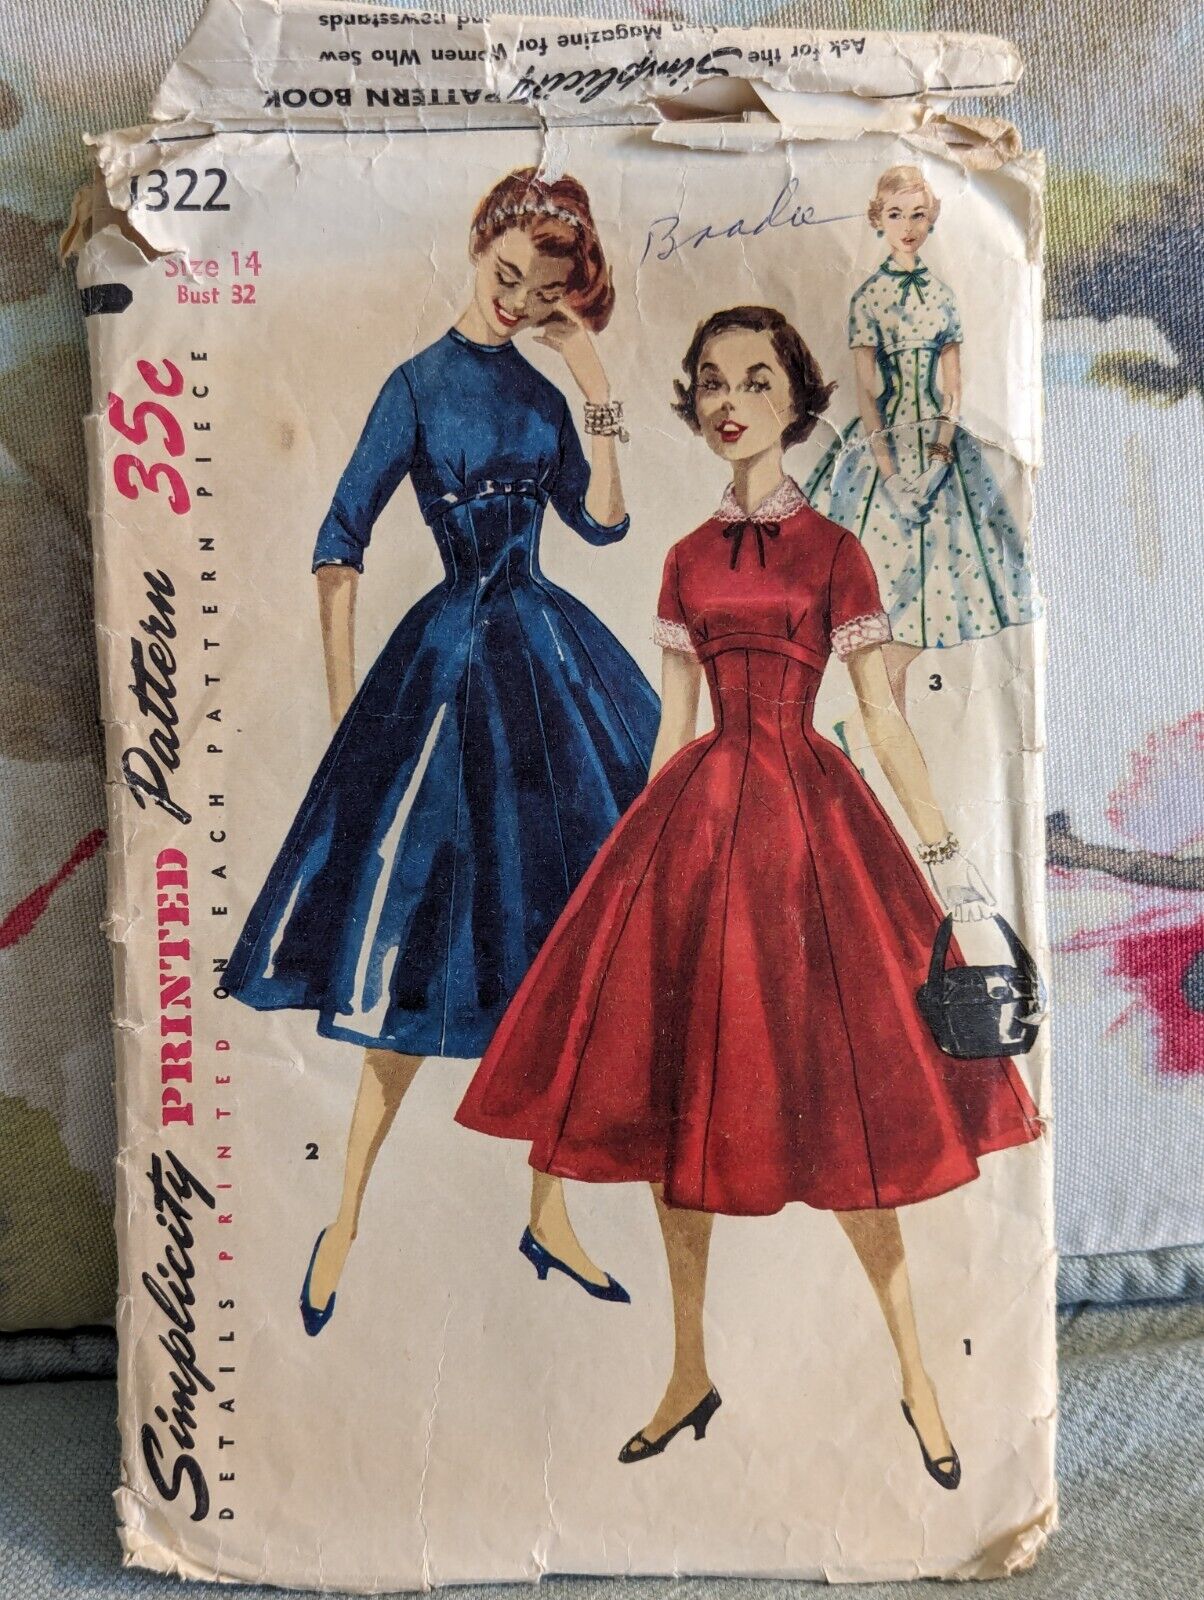 Vintage 1950s Simplicity Dress Sewing Pattern - 1322- Size 14 (Teen) - Complete